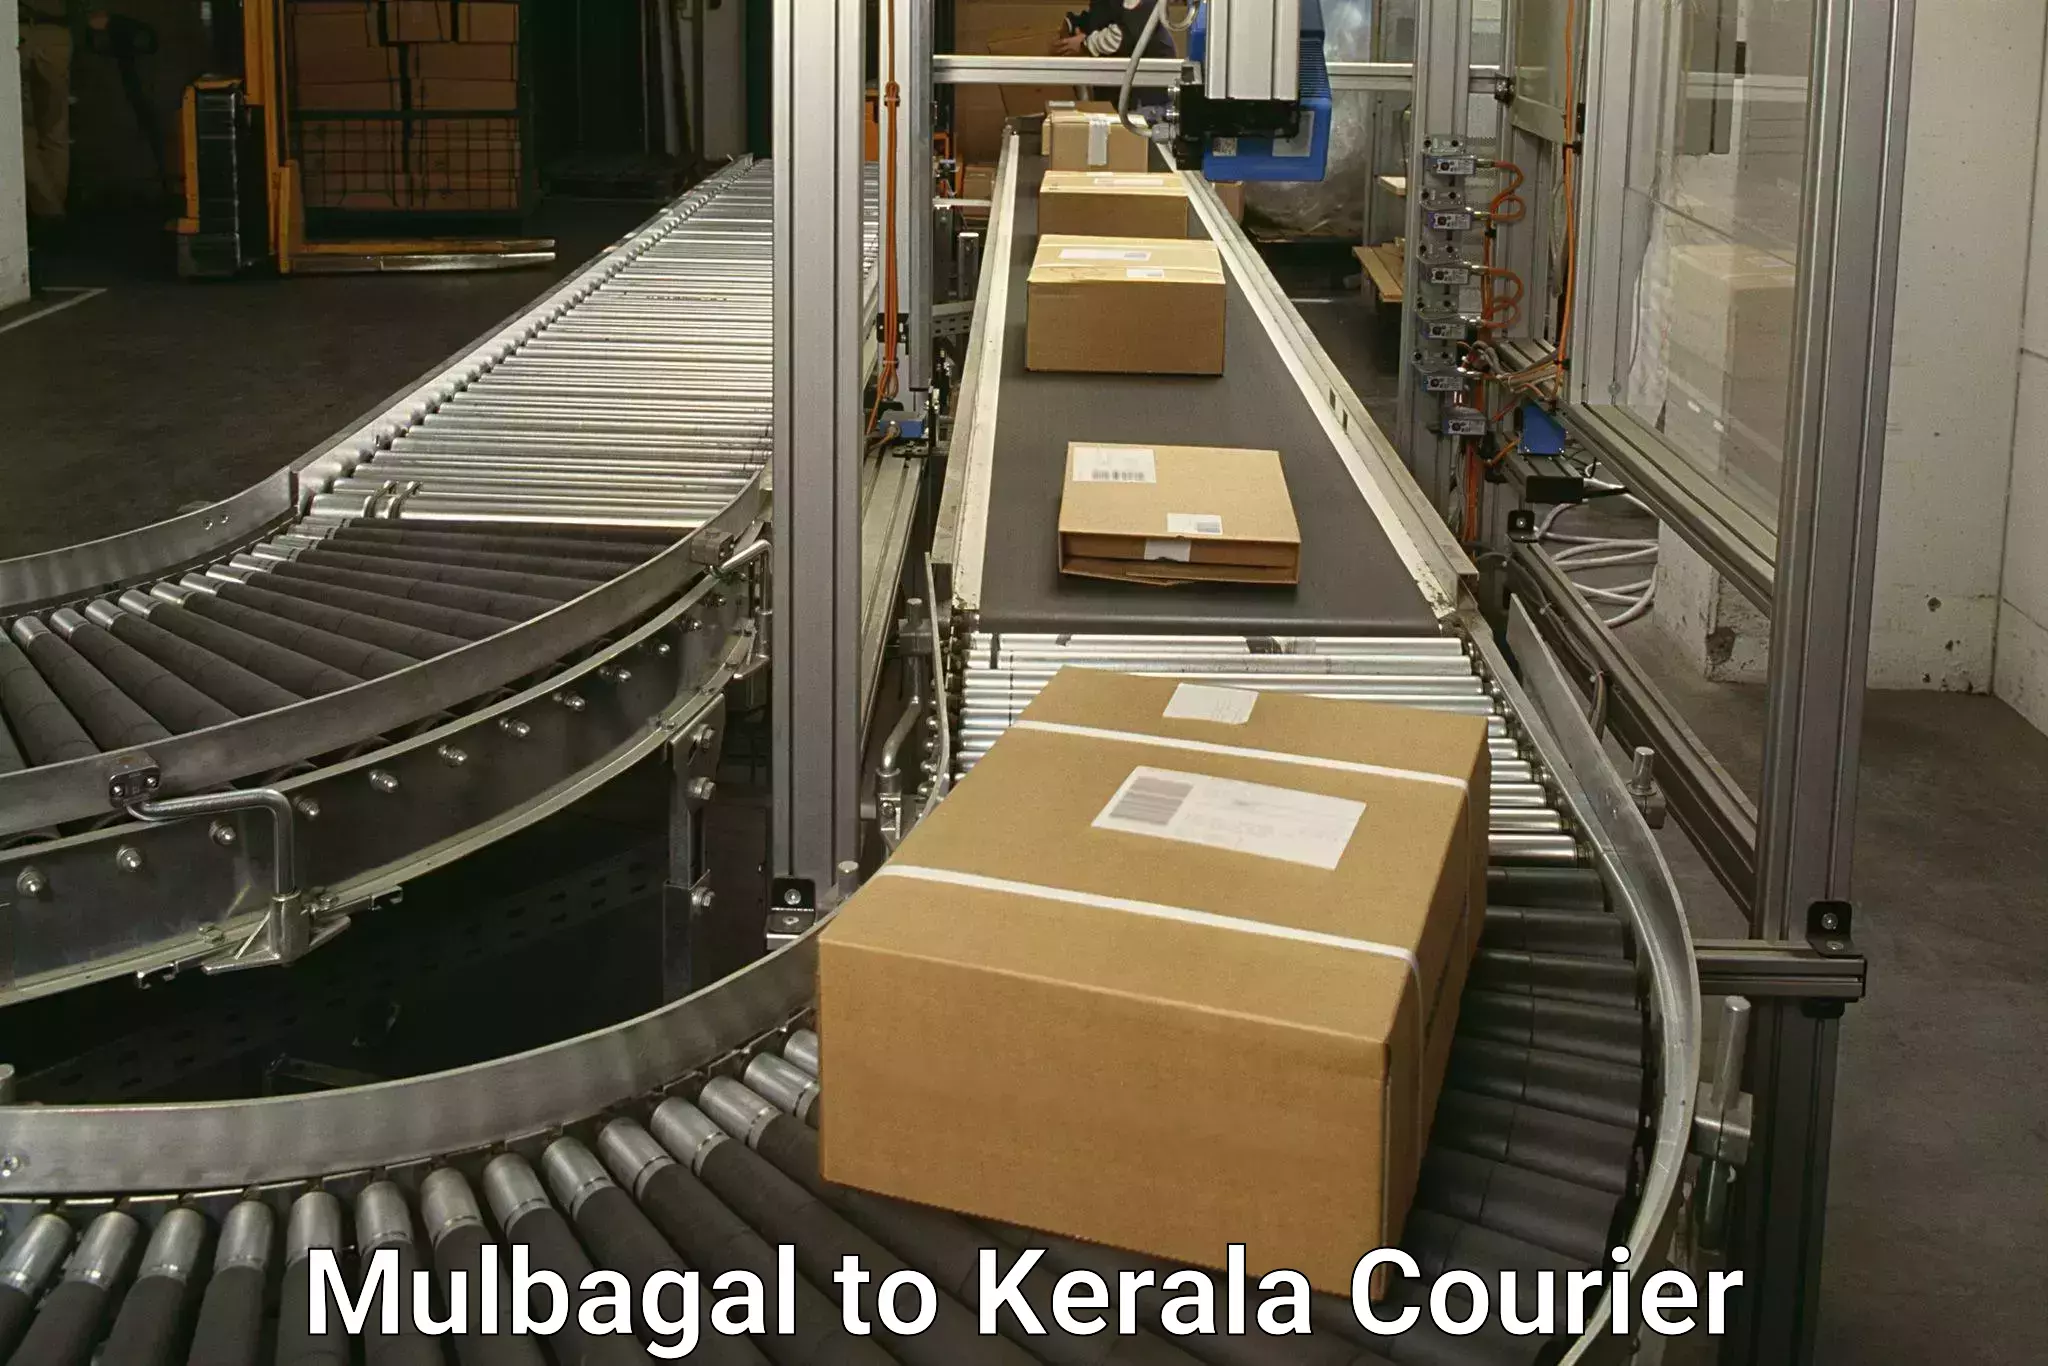 User-friendly courier app Mulbagal to Kerala